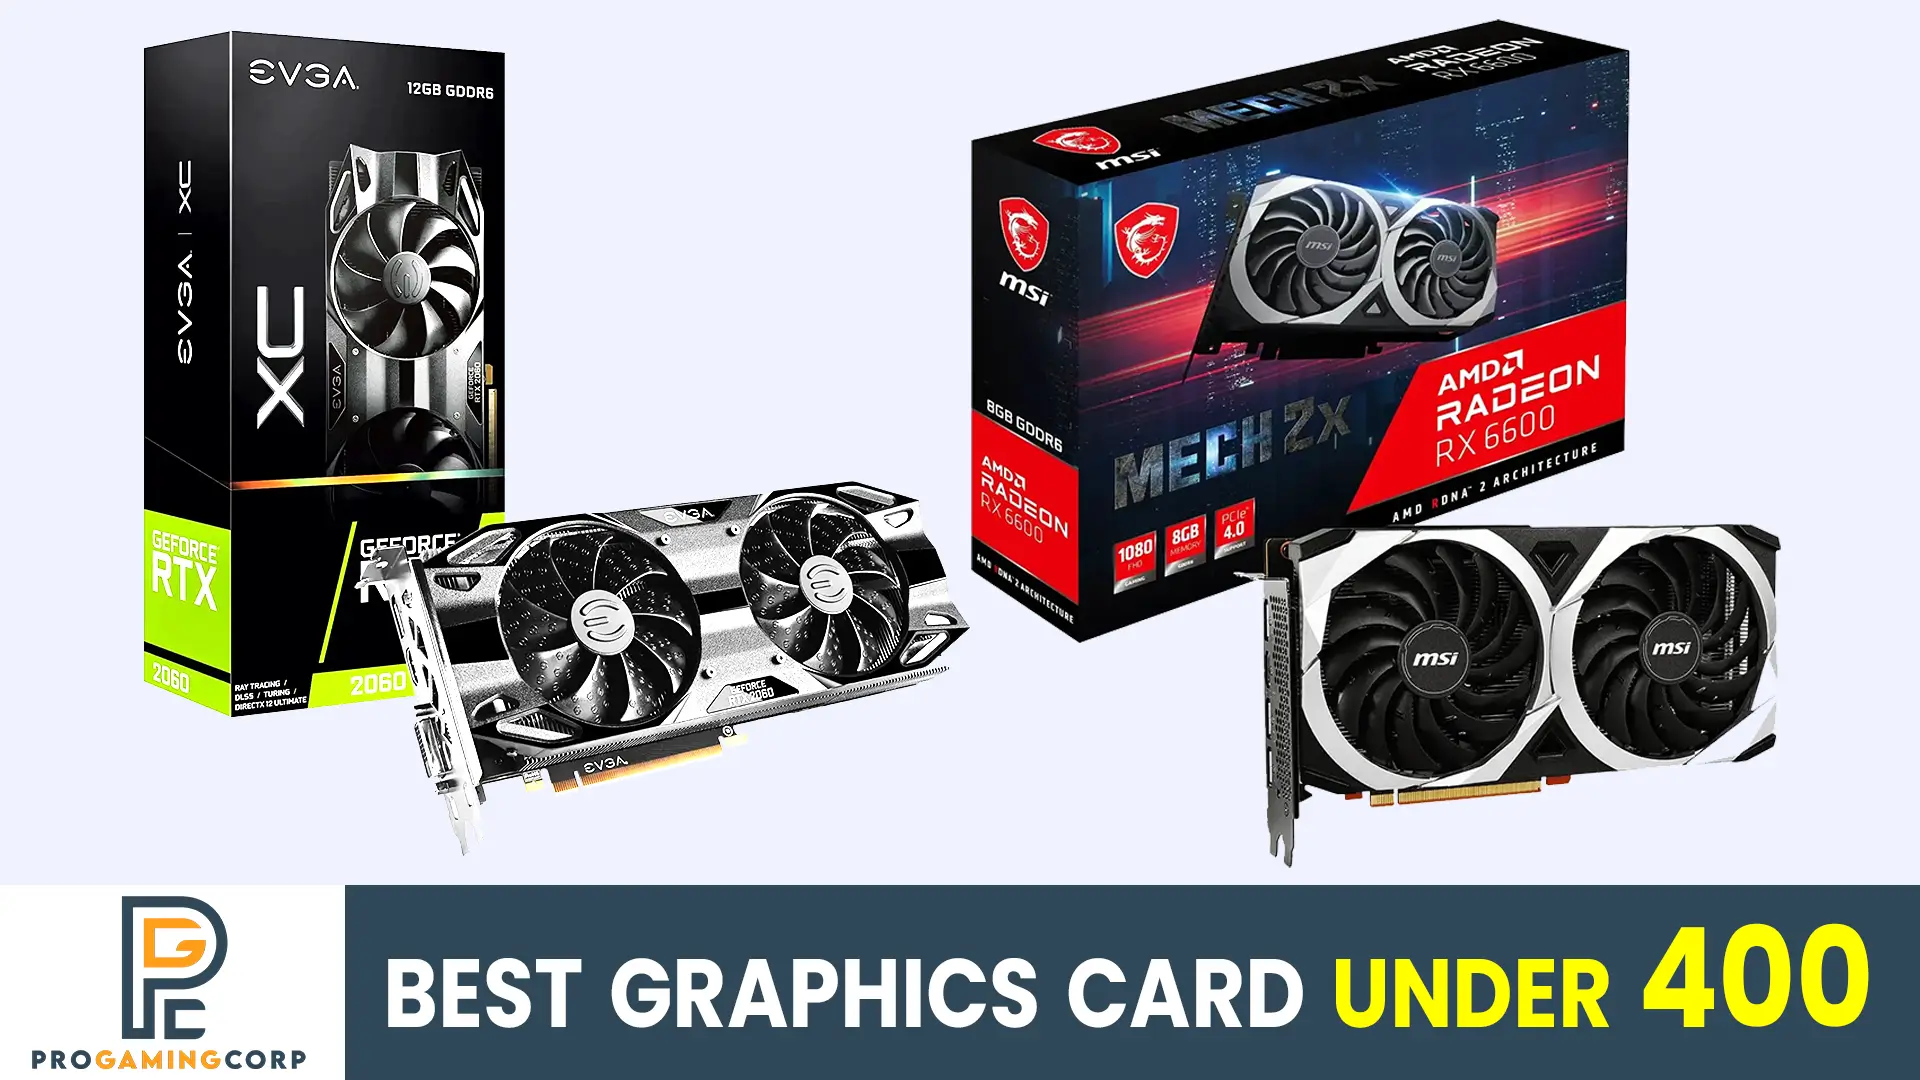 Graphics Card under 400.